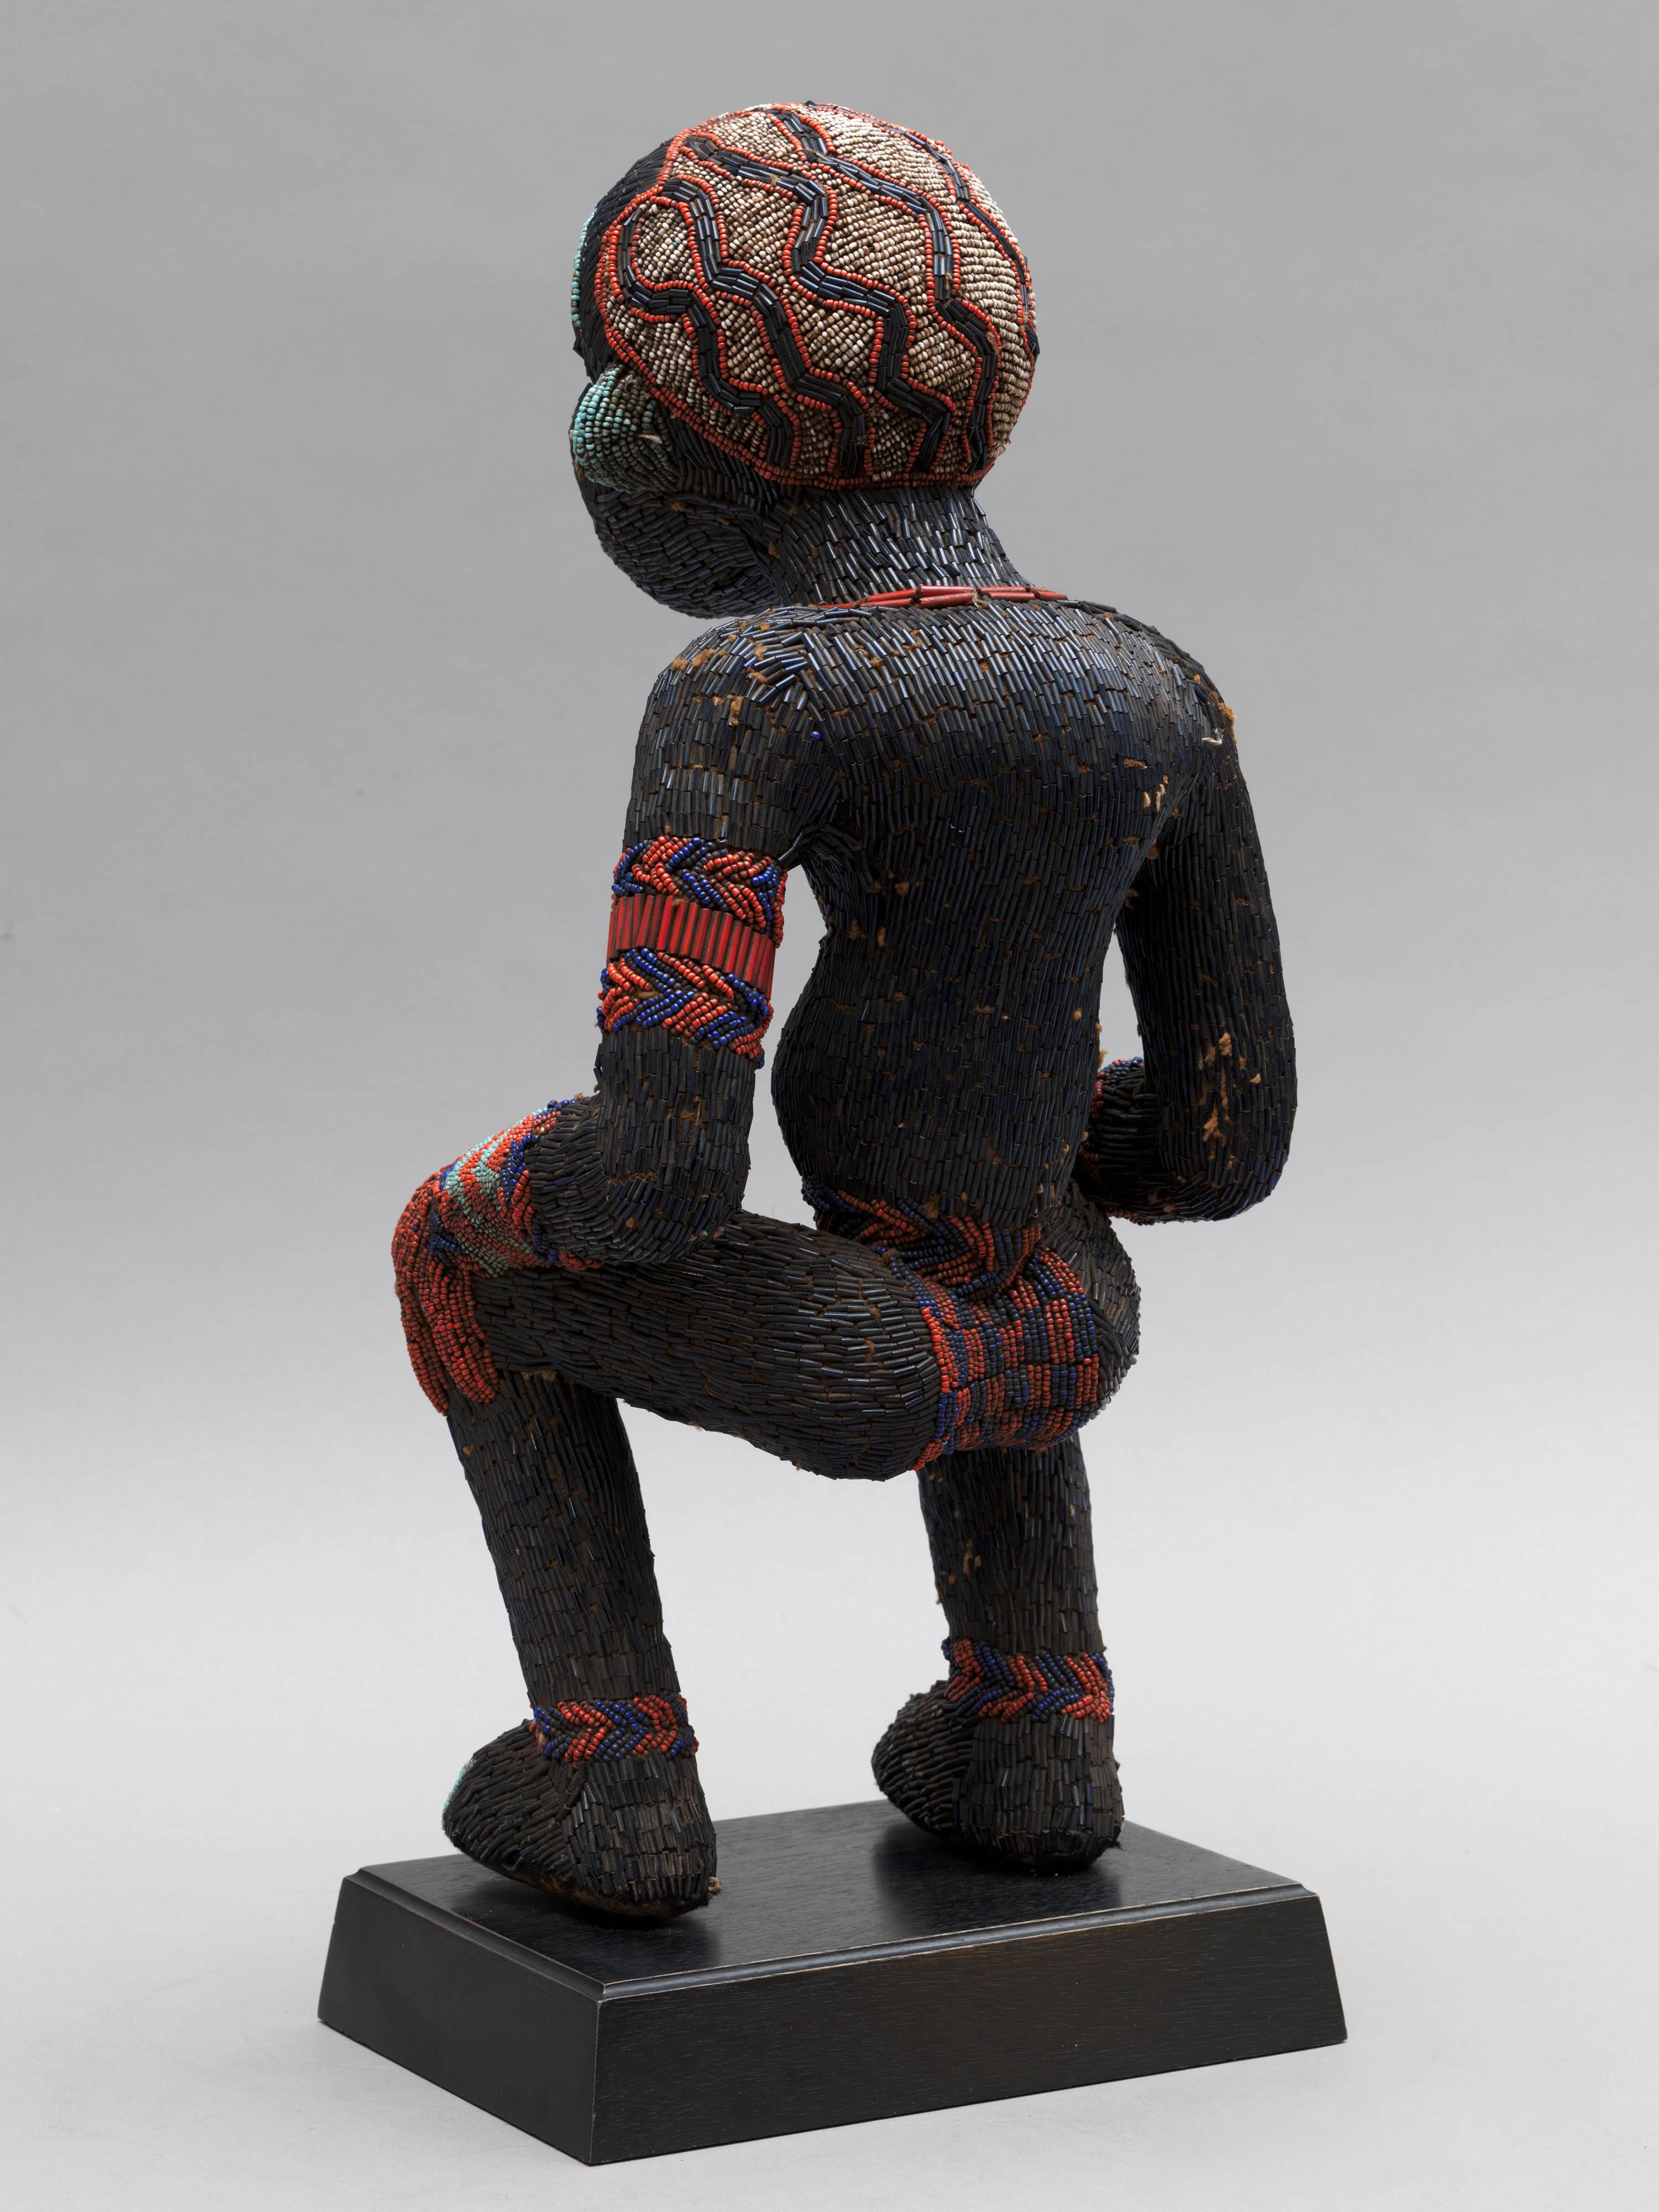 Beaded Figure were either representatives of Royal Ancestors or of Important Lineage Figures. Cameroon Art is one of the few to present figures in a non-static way. This Wooden Dancing Figure, covered in fabric and decorated with original dark blue